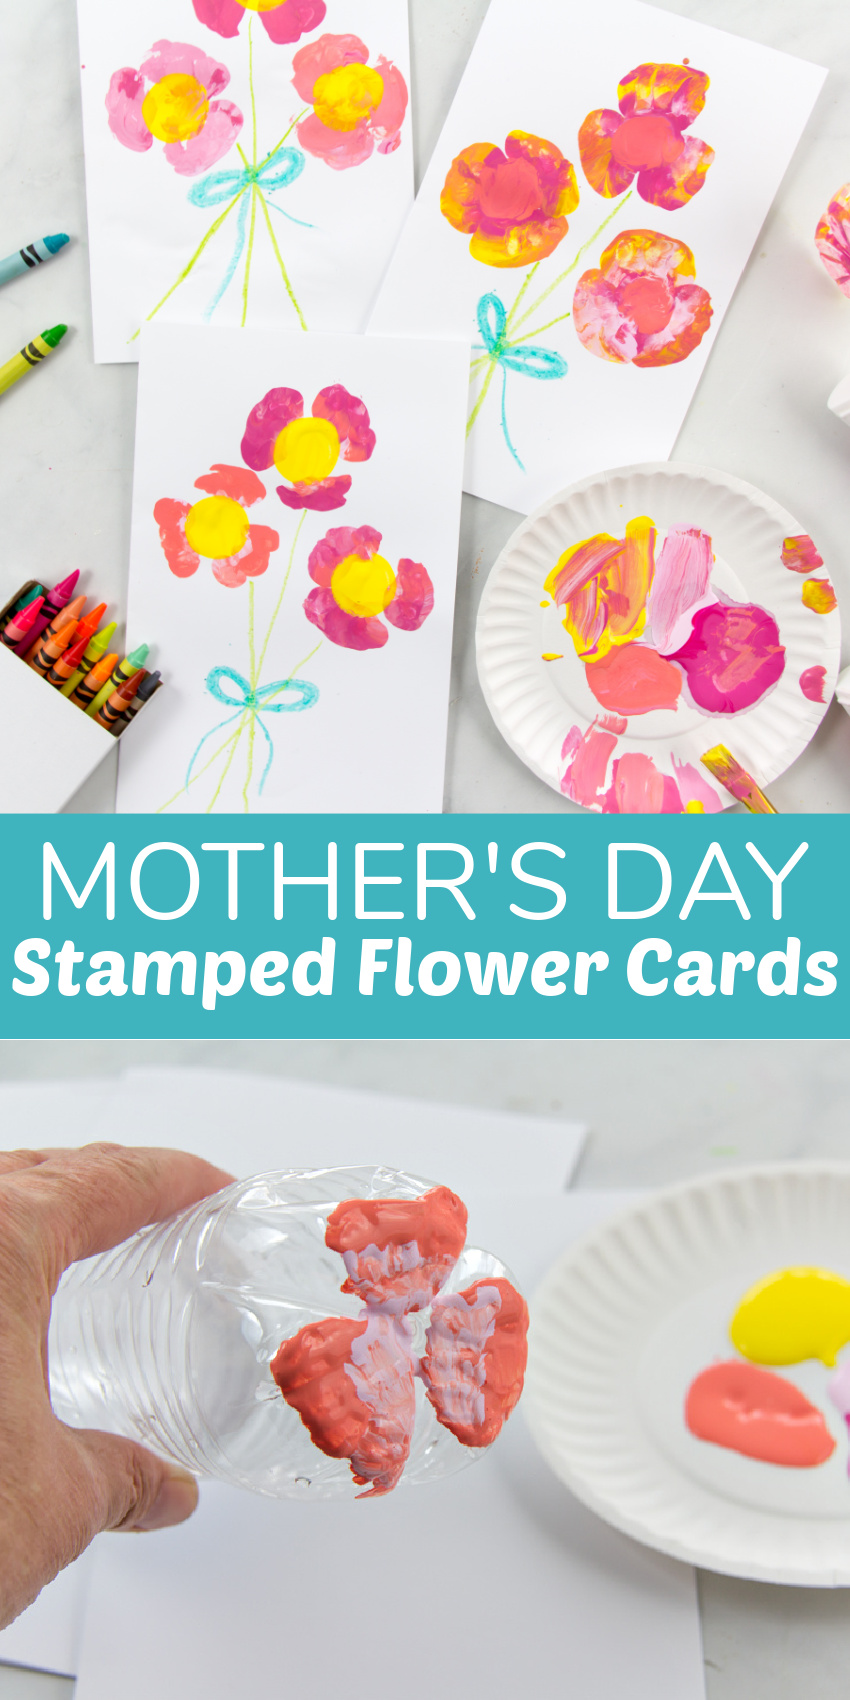 painted stamped flower cards for mothers day pinterest image